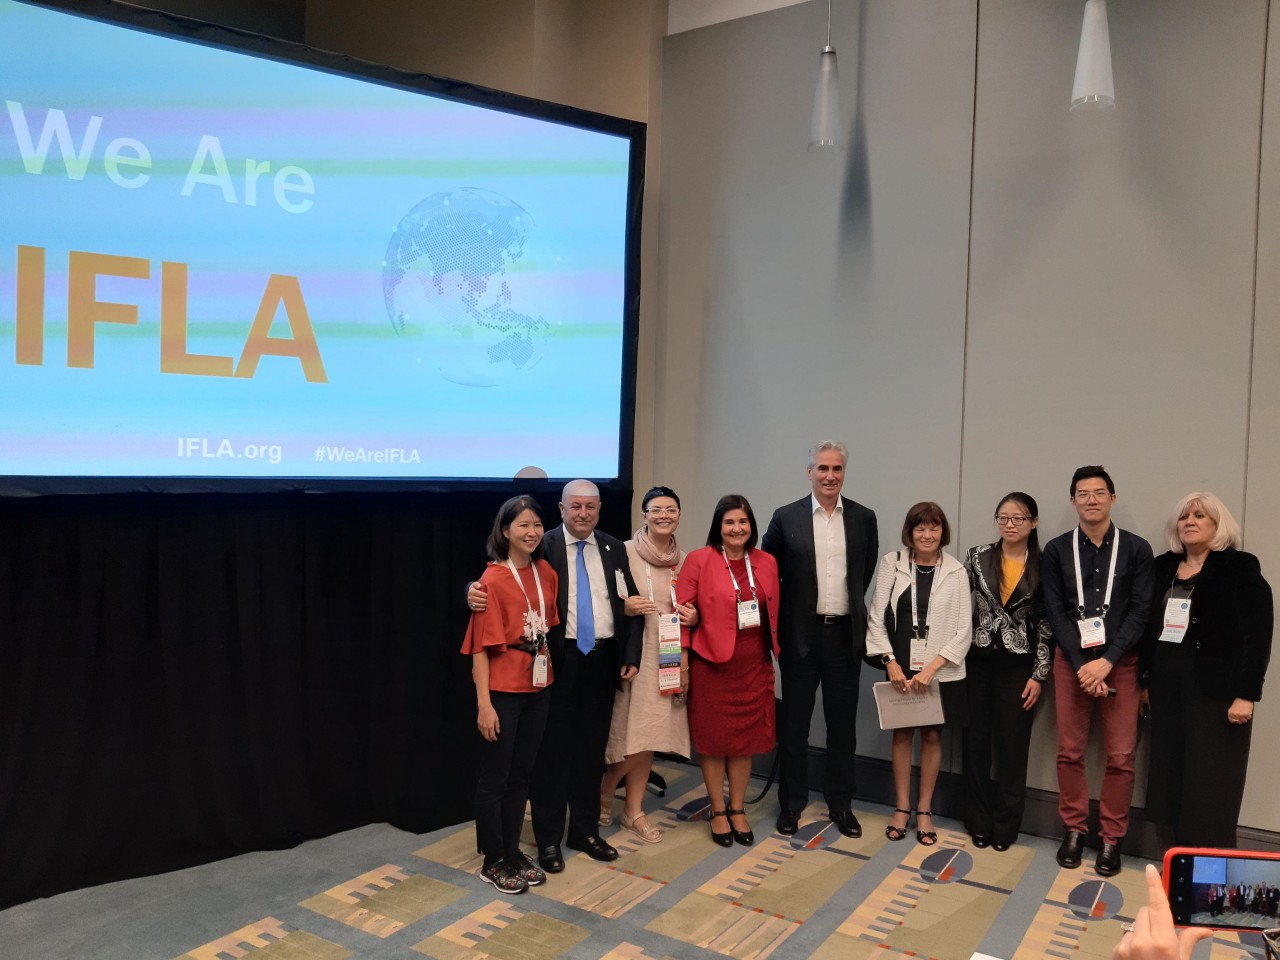 IFLA President Glòria Pérez-Salmerón, Secretary General Gerald Leitner and Past IFLA President Donna Scheeder (centre) with members of the IRRT International Connections Committee